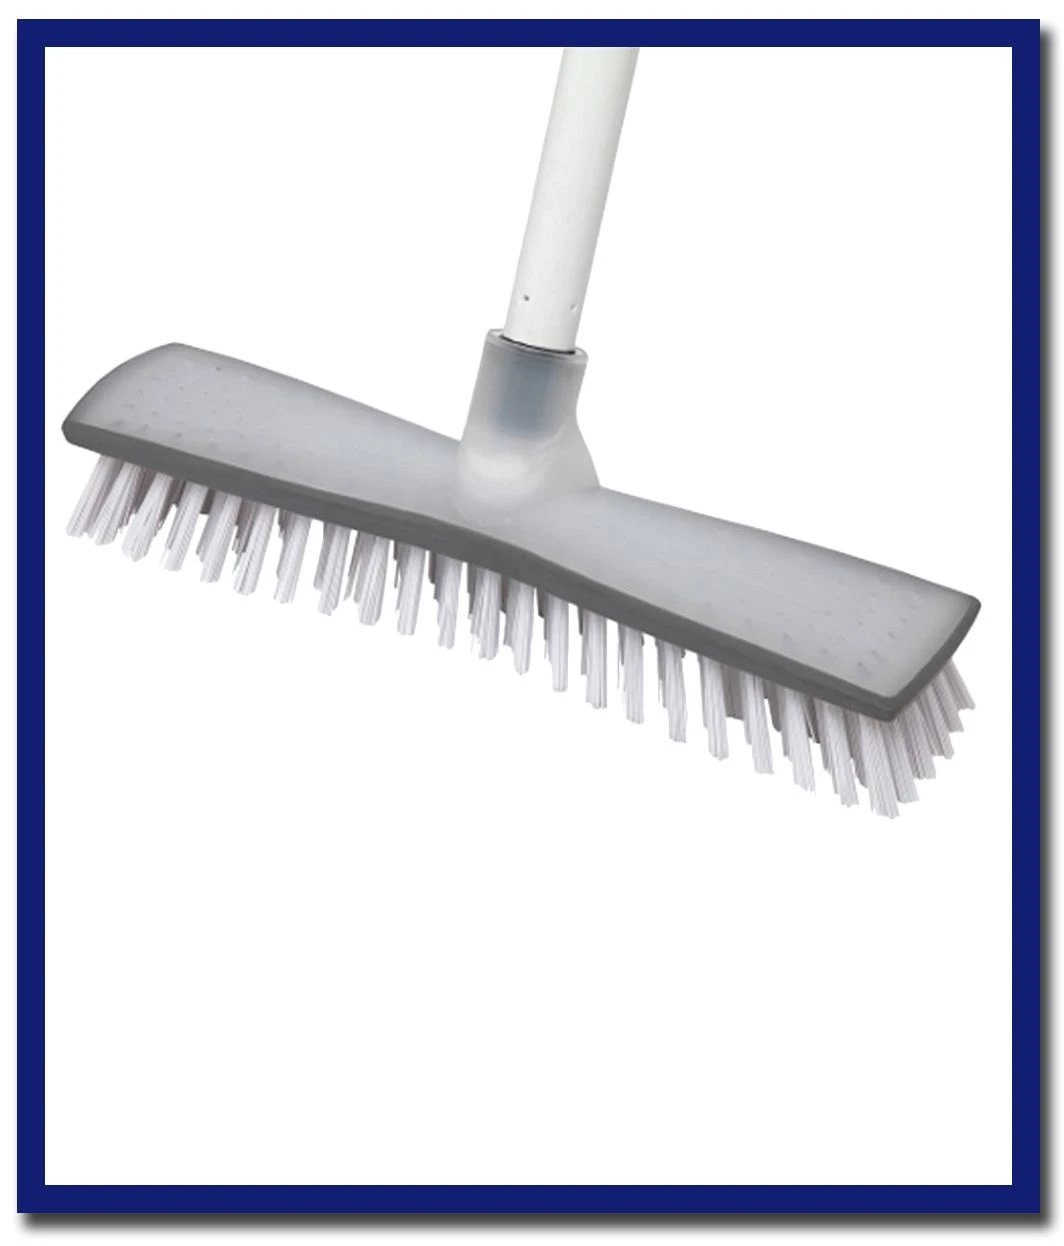 Edco Deck Scrub With Handle (1 Unit) - Stone Doctor Australia - Cleaning Accessories > Sweeping > Deck Scrub